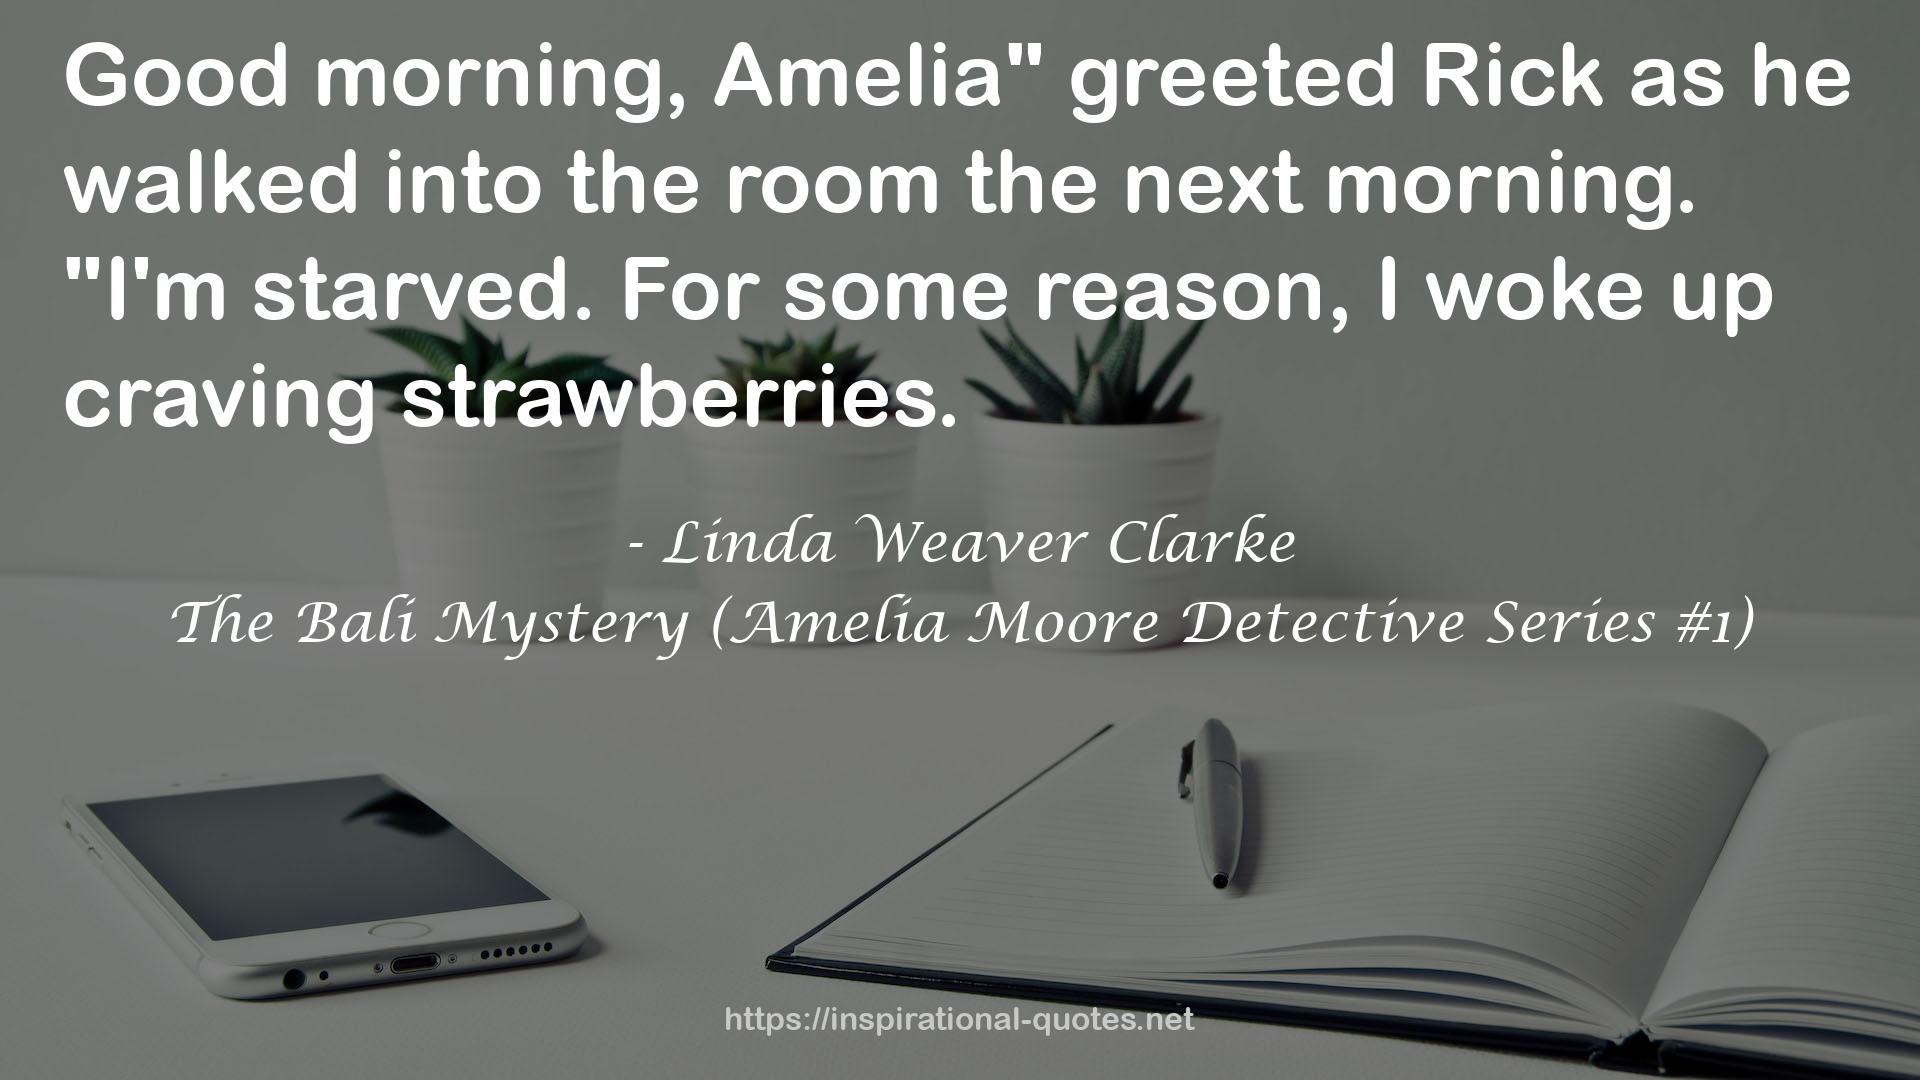 The Bali Mystery (Amelia Moore Detective Series #1) QUOTES